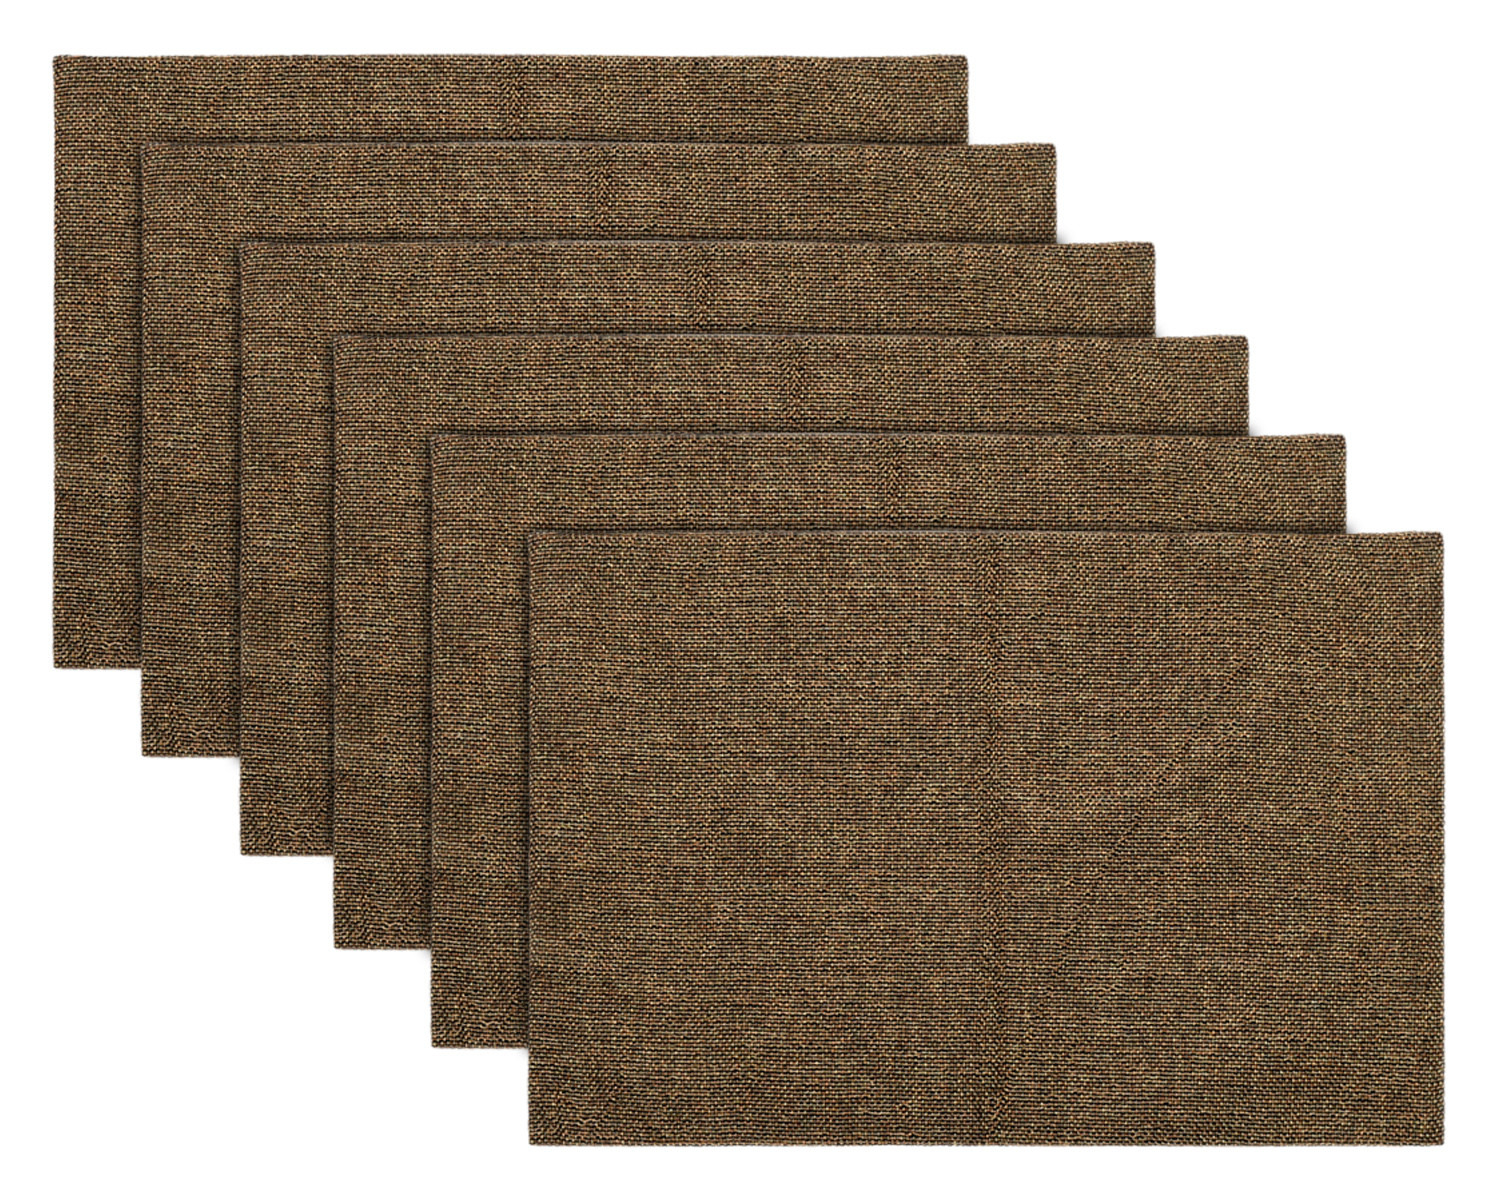 Kuber Industries Jute Table Placemat for Home, Hotels, Set of 6 (Brown)